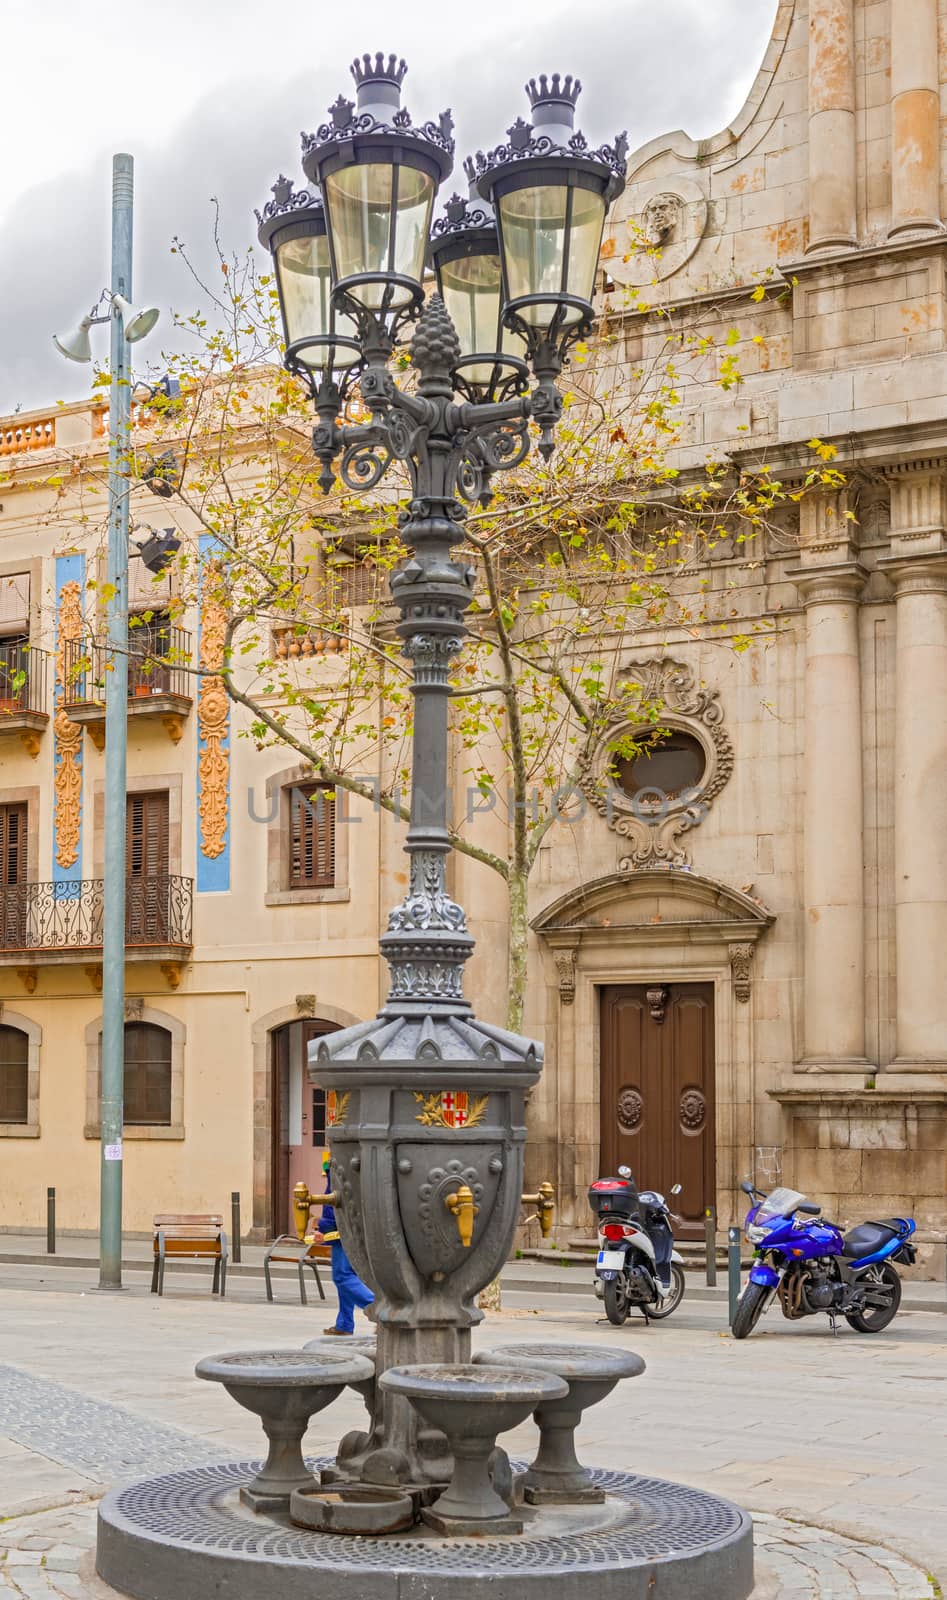 Ornate street light in front of La Parroquia San Miguel del Porto a catholic church in Barcelona, Spain on January 25, 2014